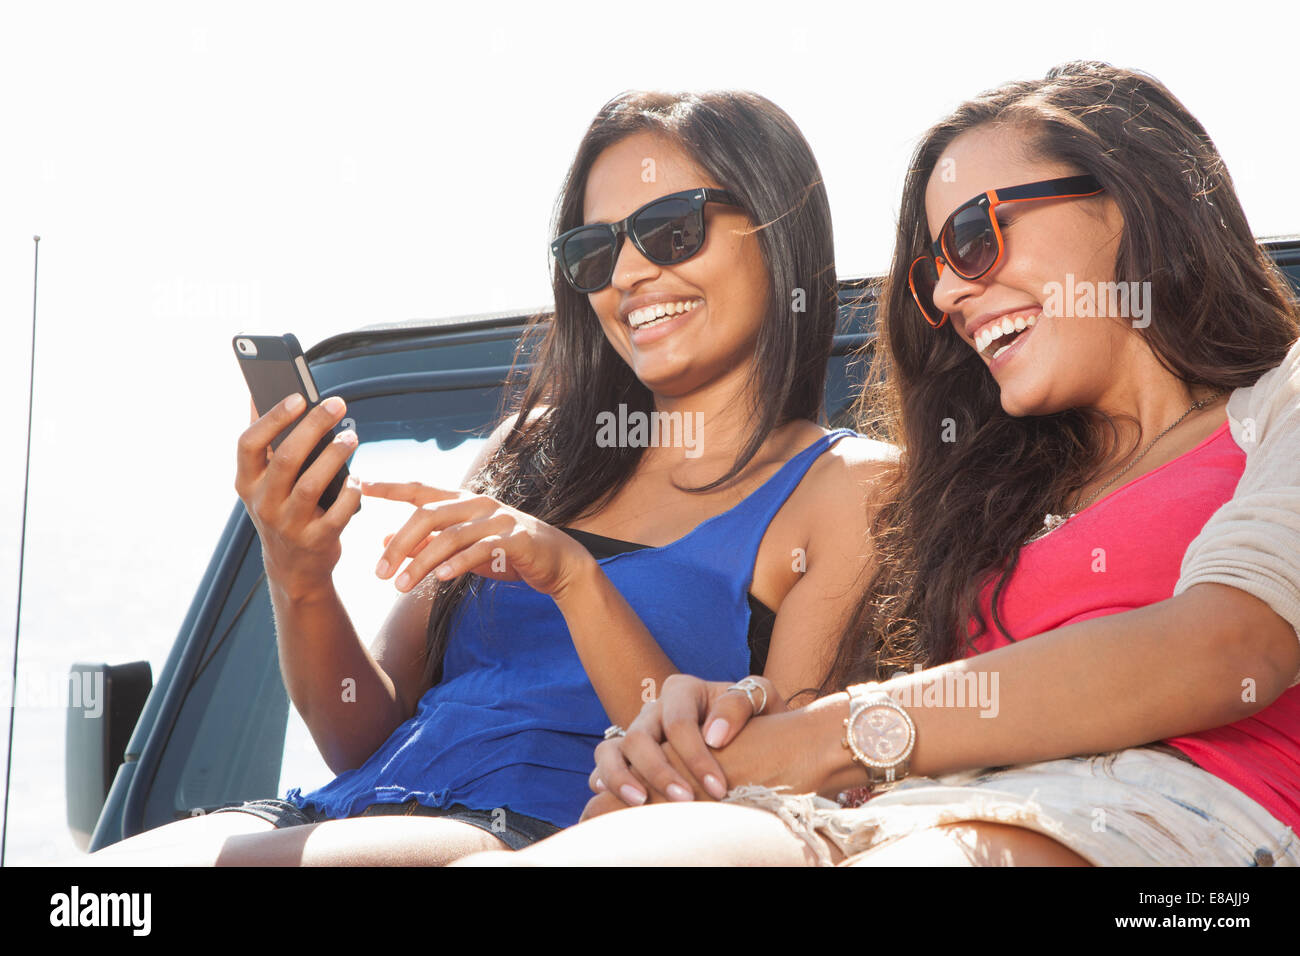 Two young women sitting on jeep hood looking at smartphone Stock Photo